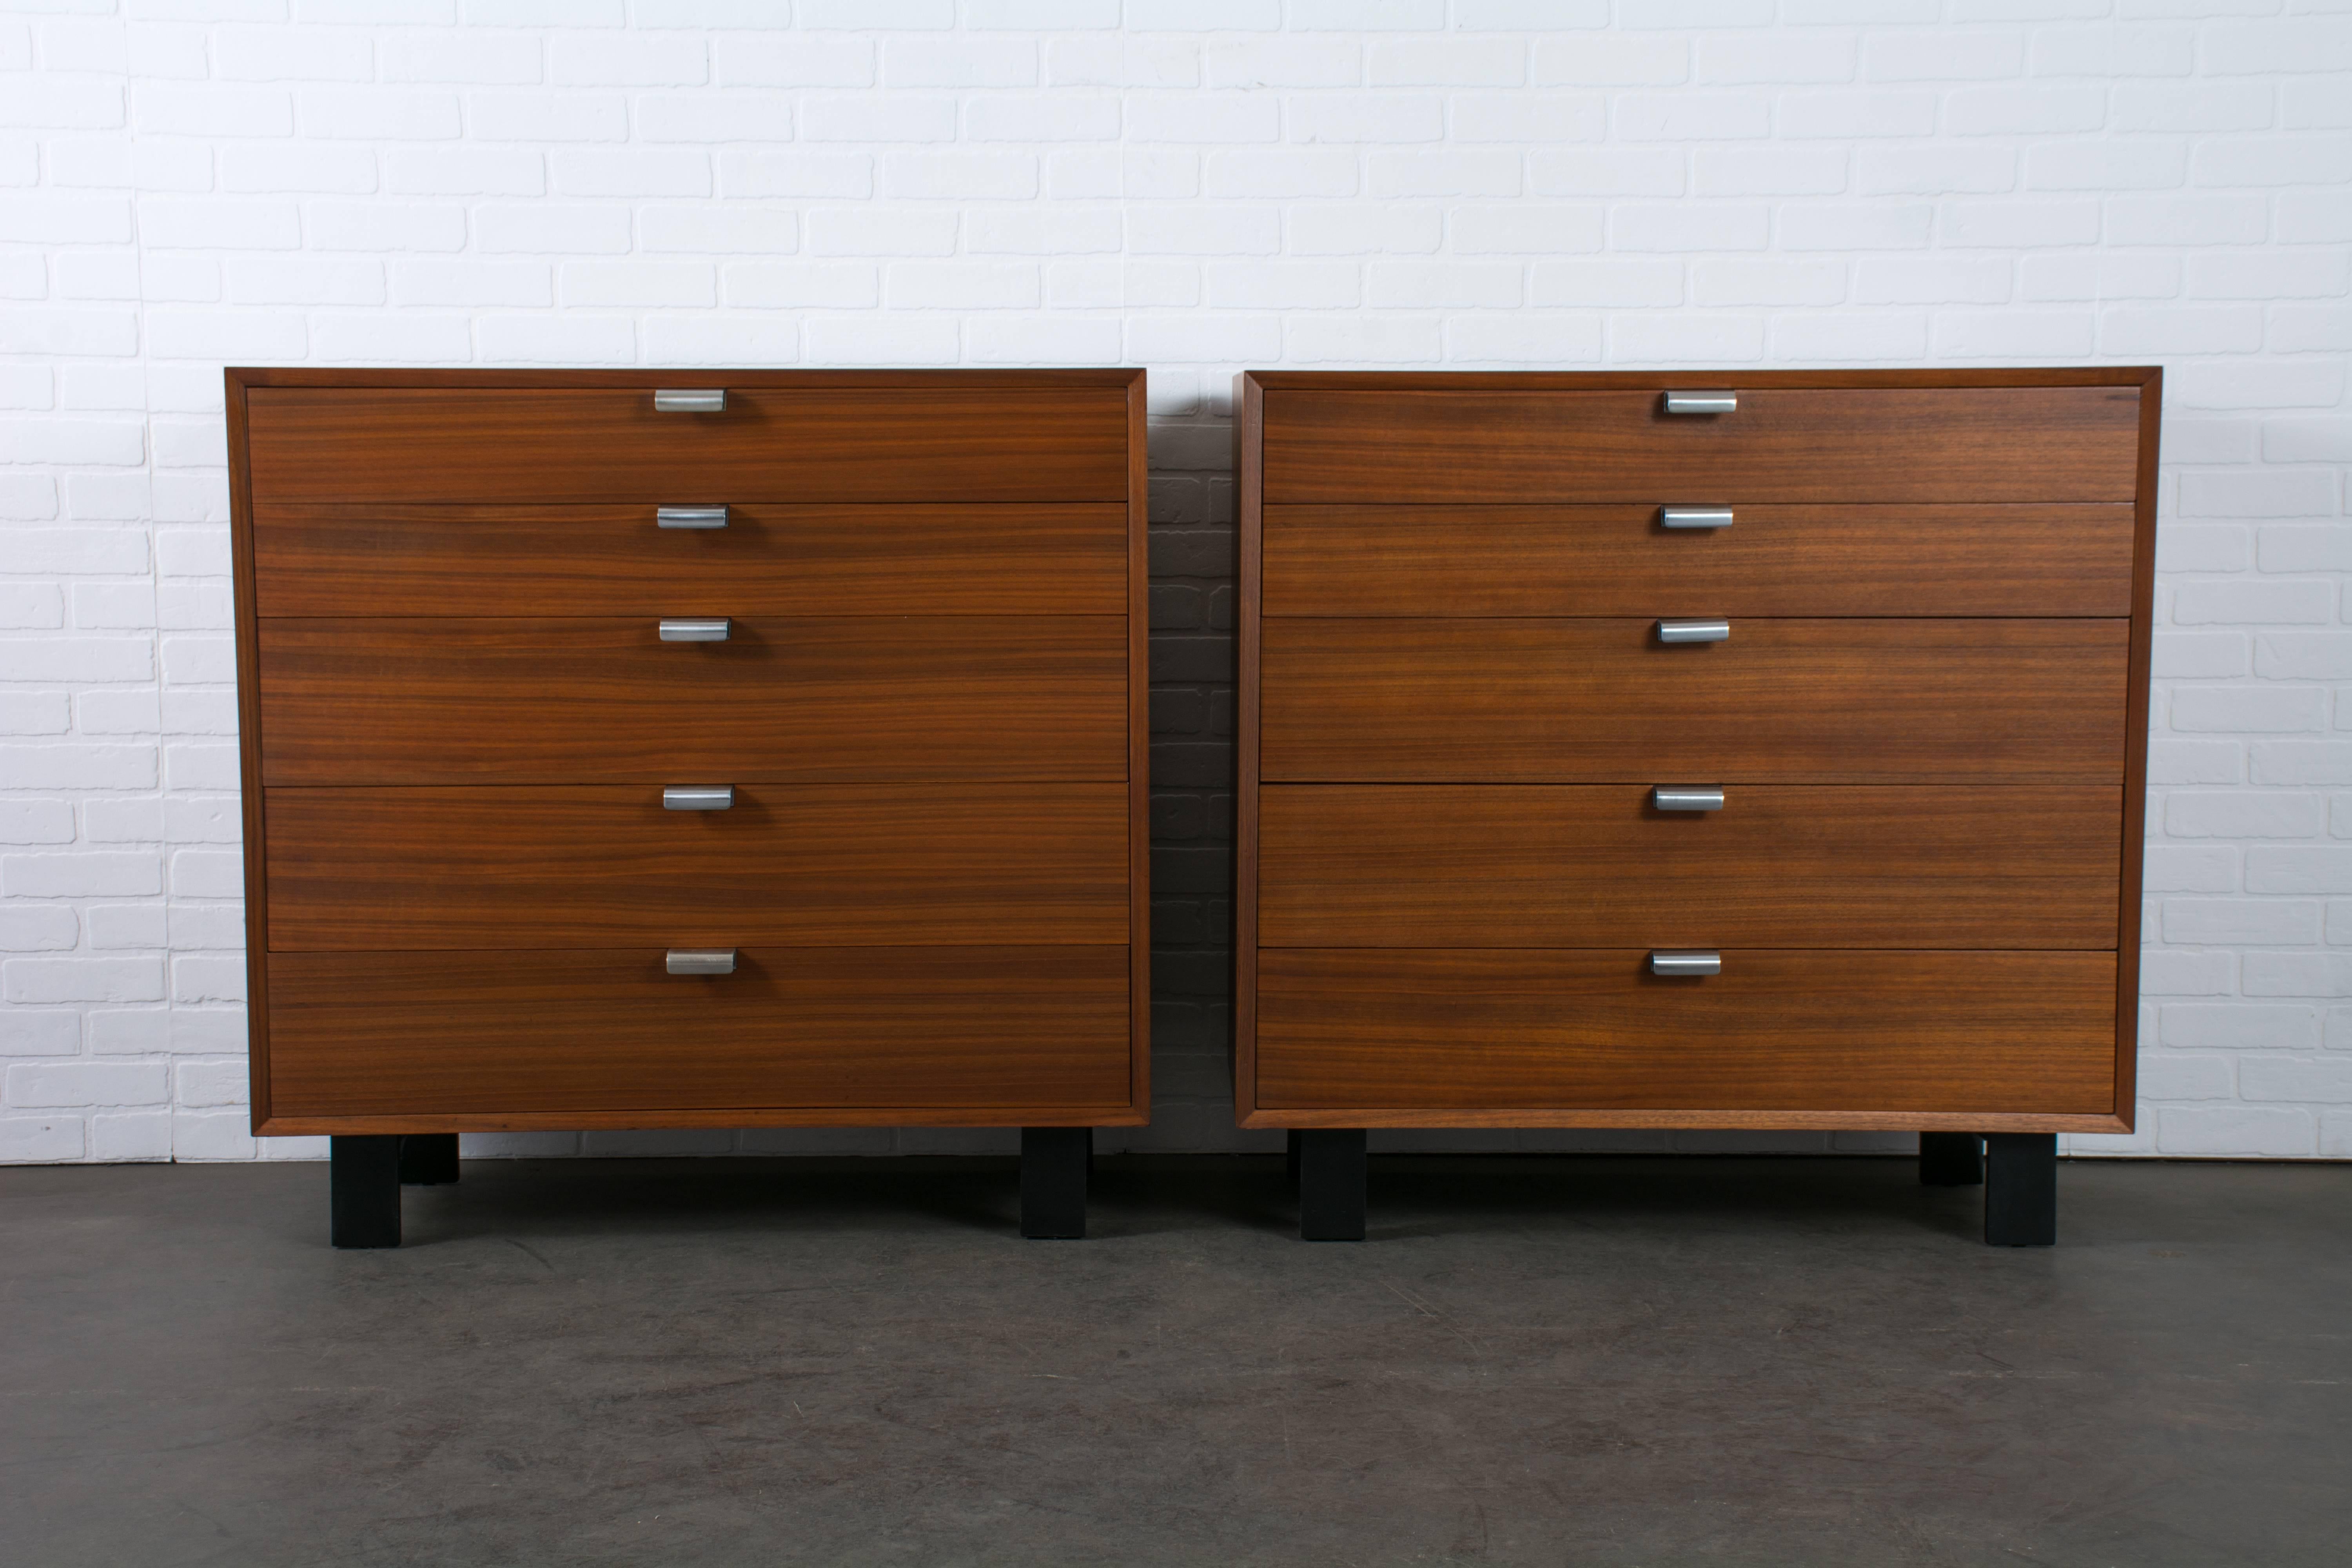 These Mid-Century Modern dressers were designed by George Nelson for Herman Miller in the 1950's. They are walnut with black legs and metal handles with a chrome finish. There are dividers in the top and middle drawers. This pair of matching